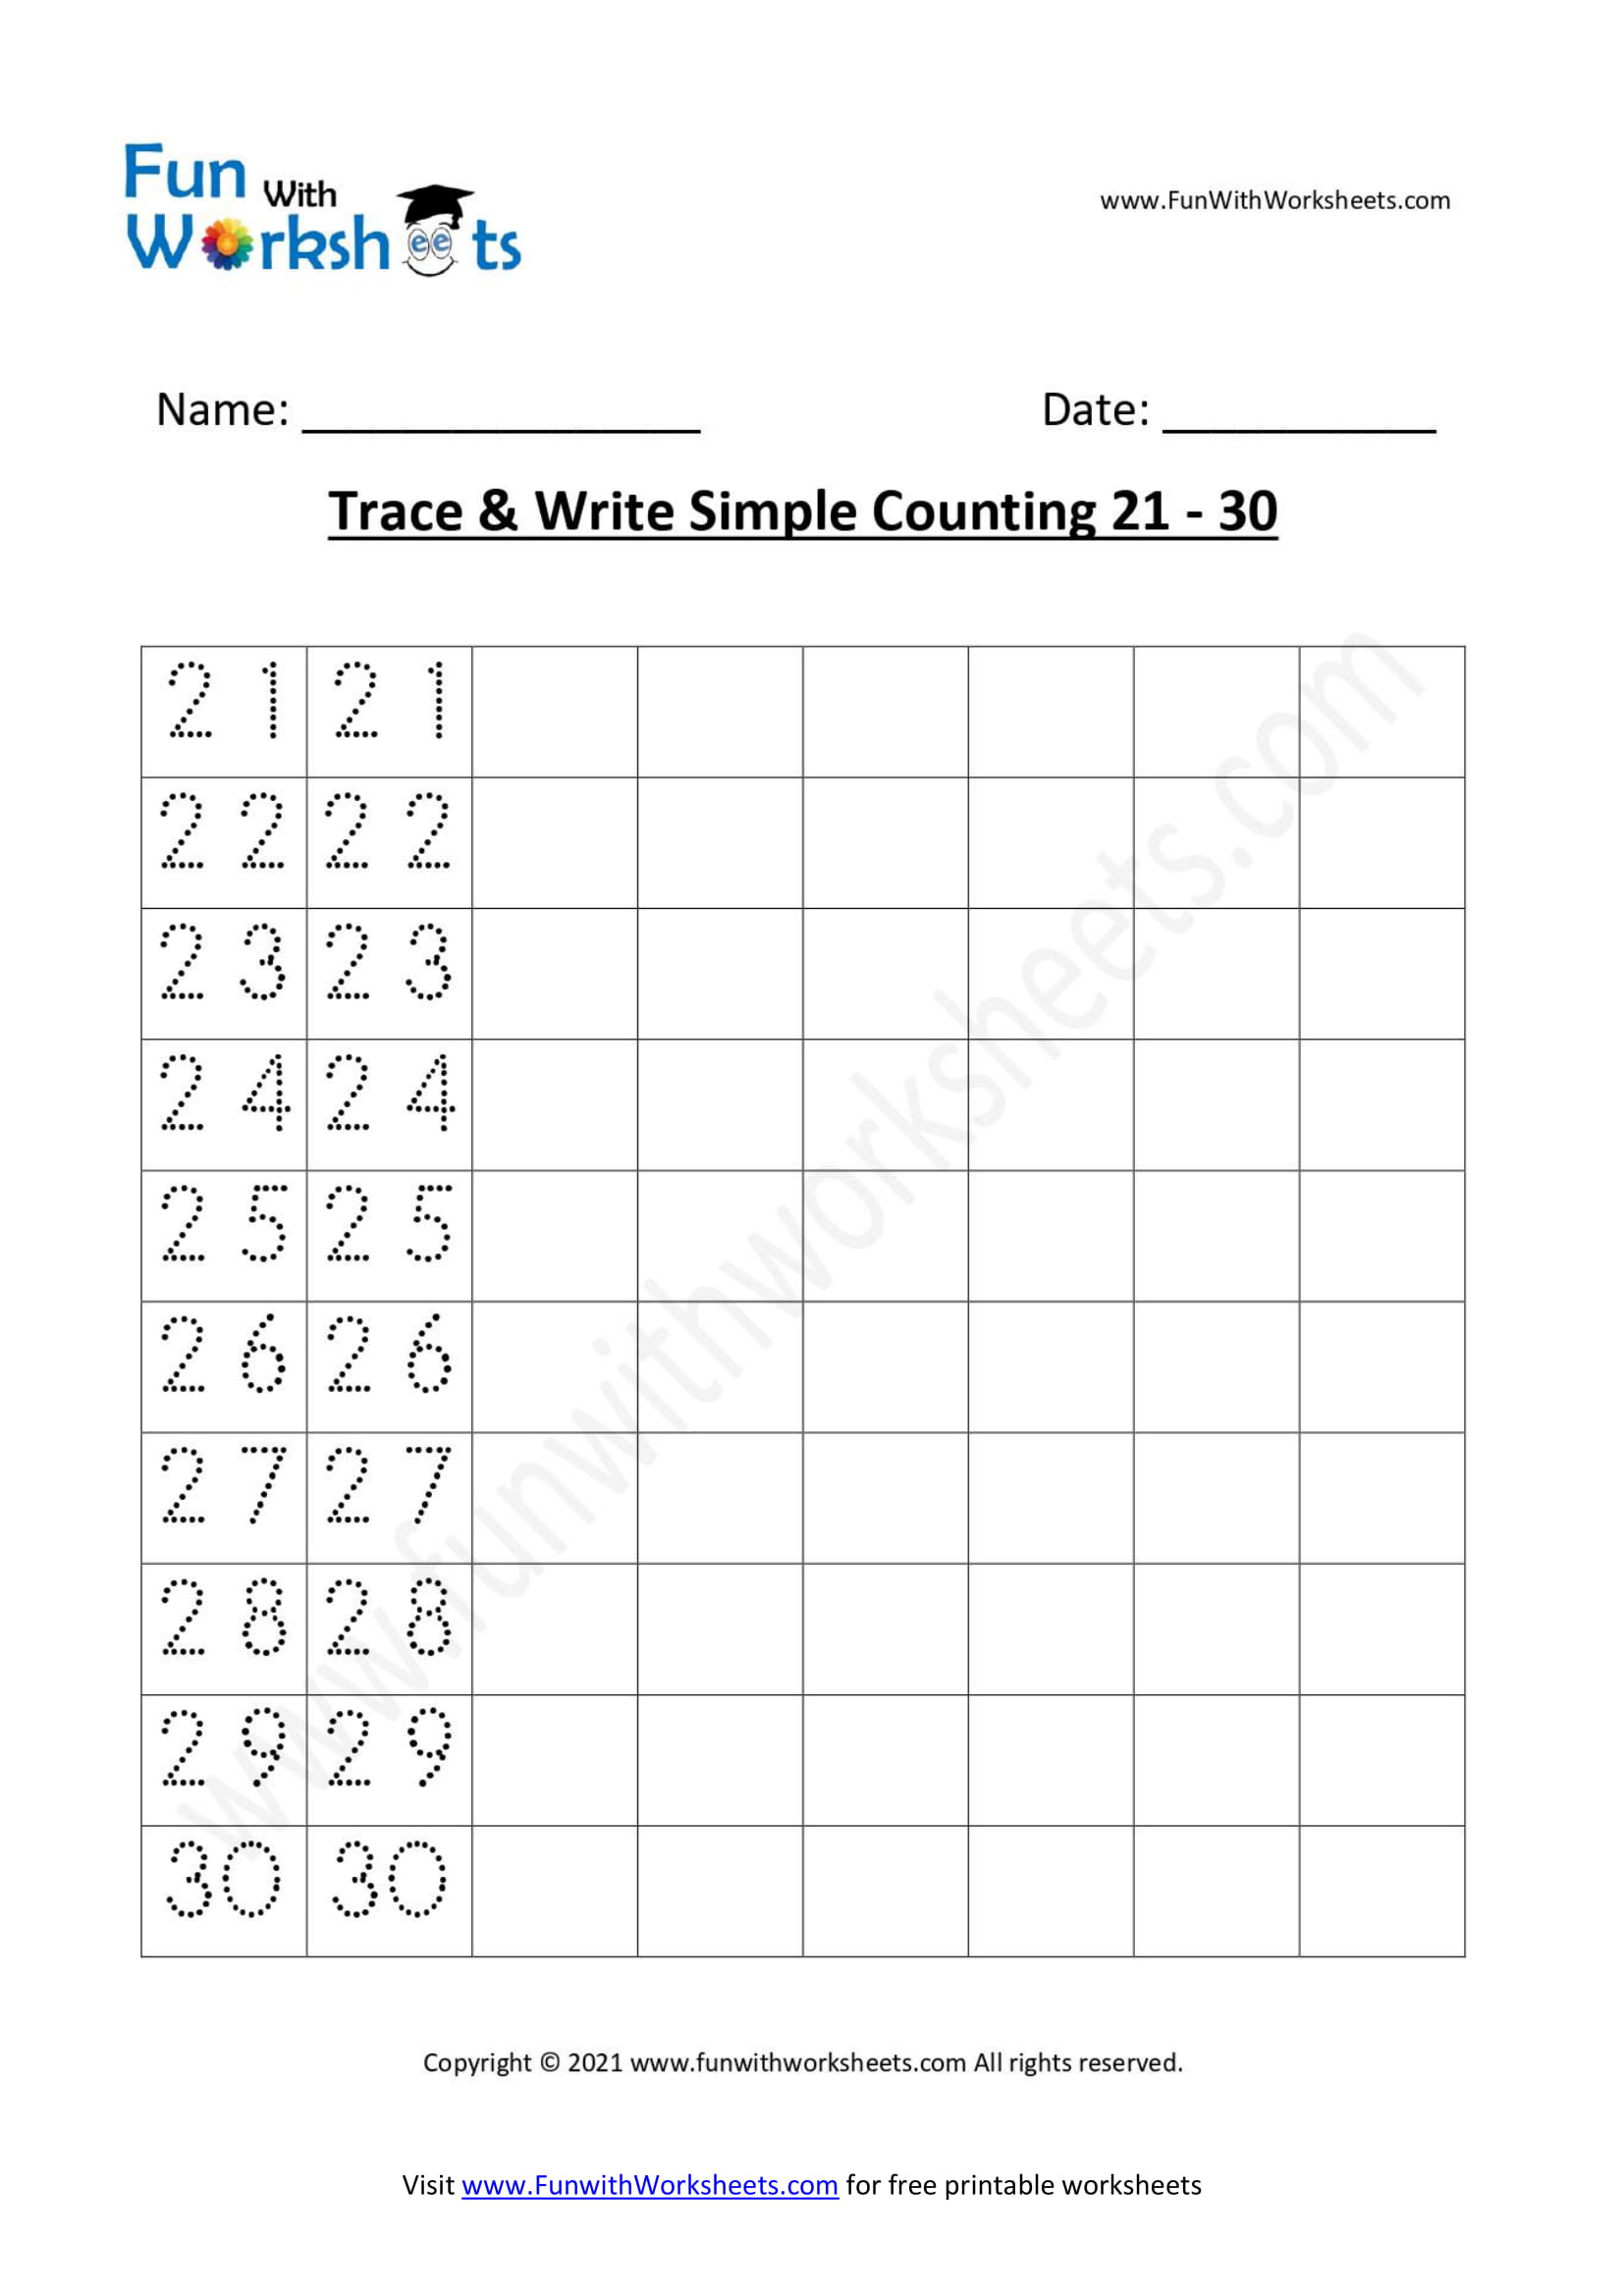 forward-counting-21-to-30-worksheets-for-kindergarten-first-second-grade-math-worksheets